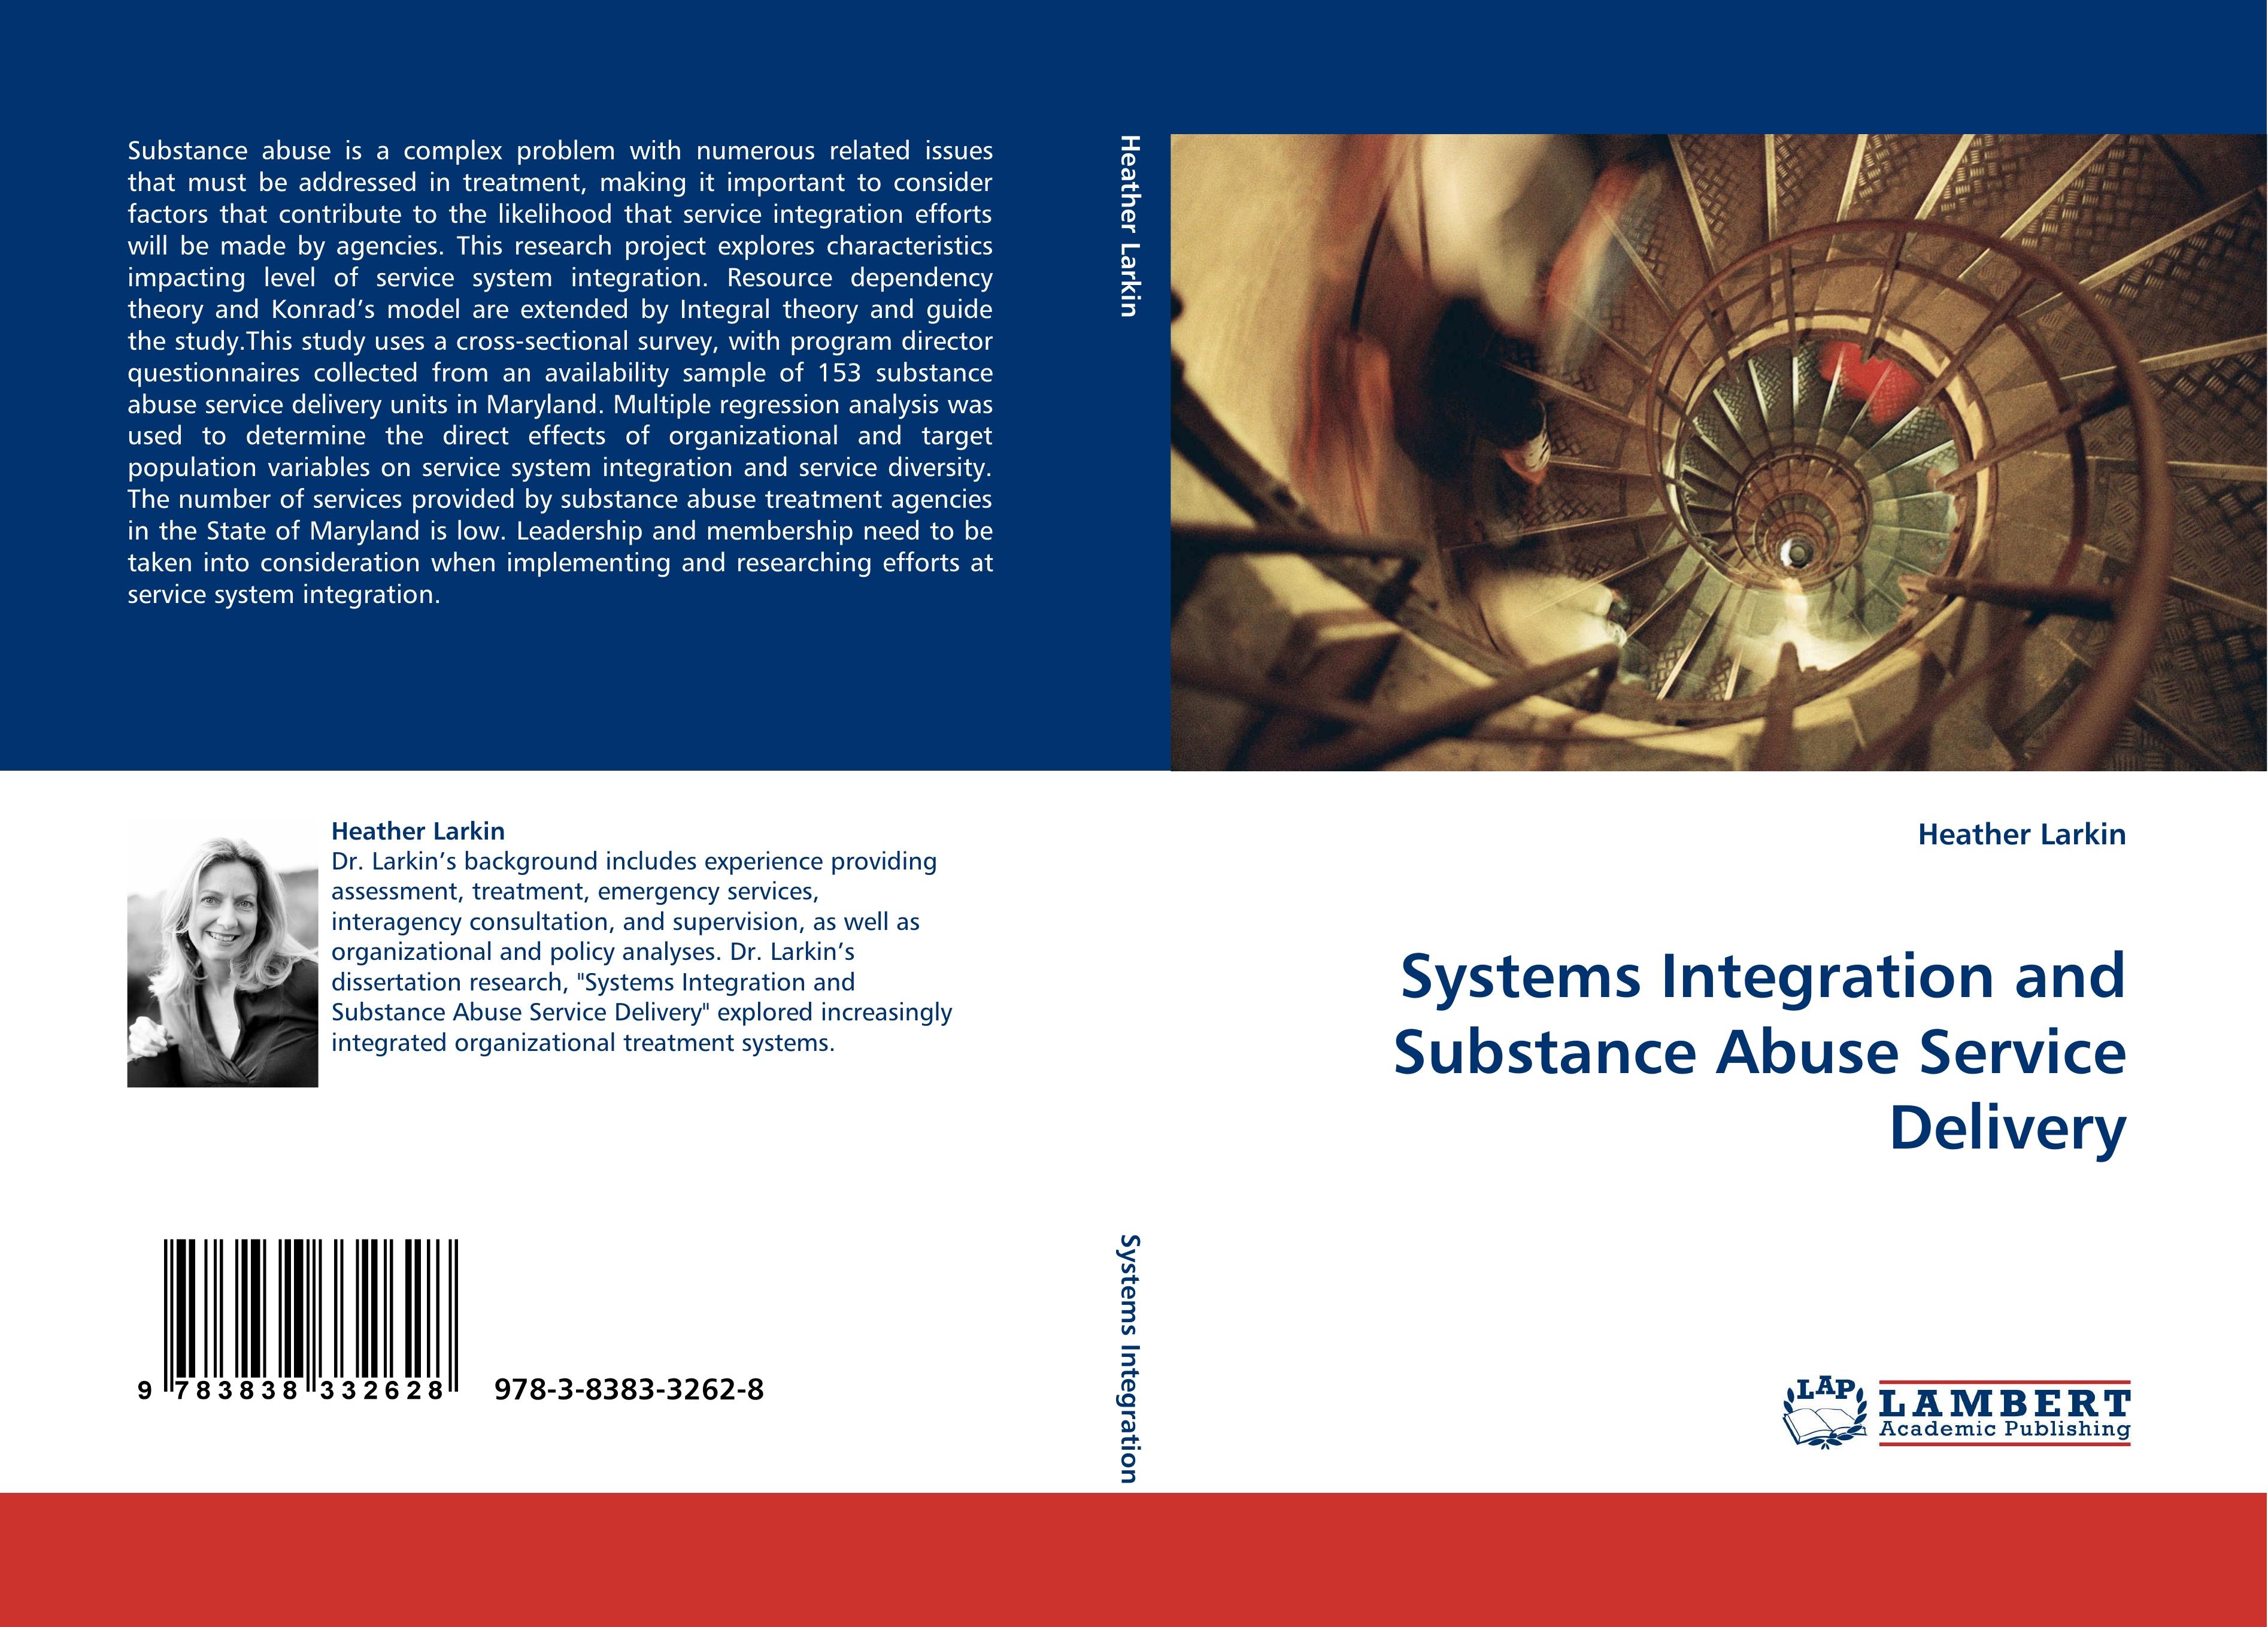 Systems Integration and Substance Abuse Service Delivery - Heather Larkin